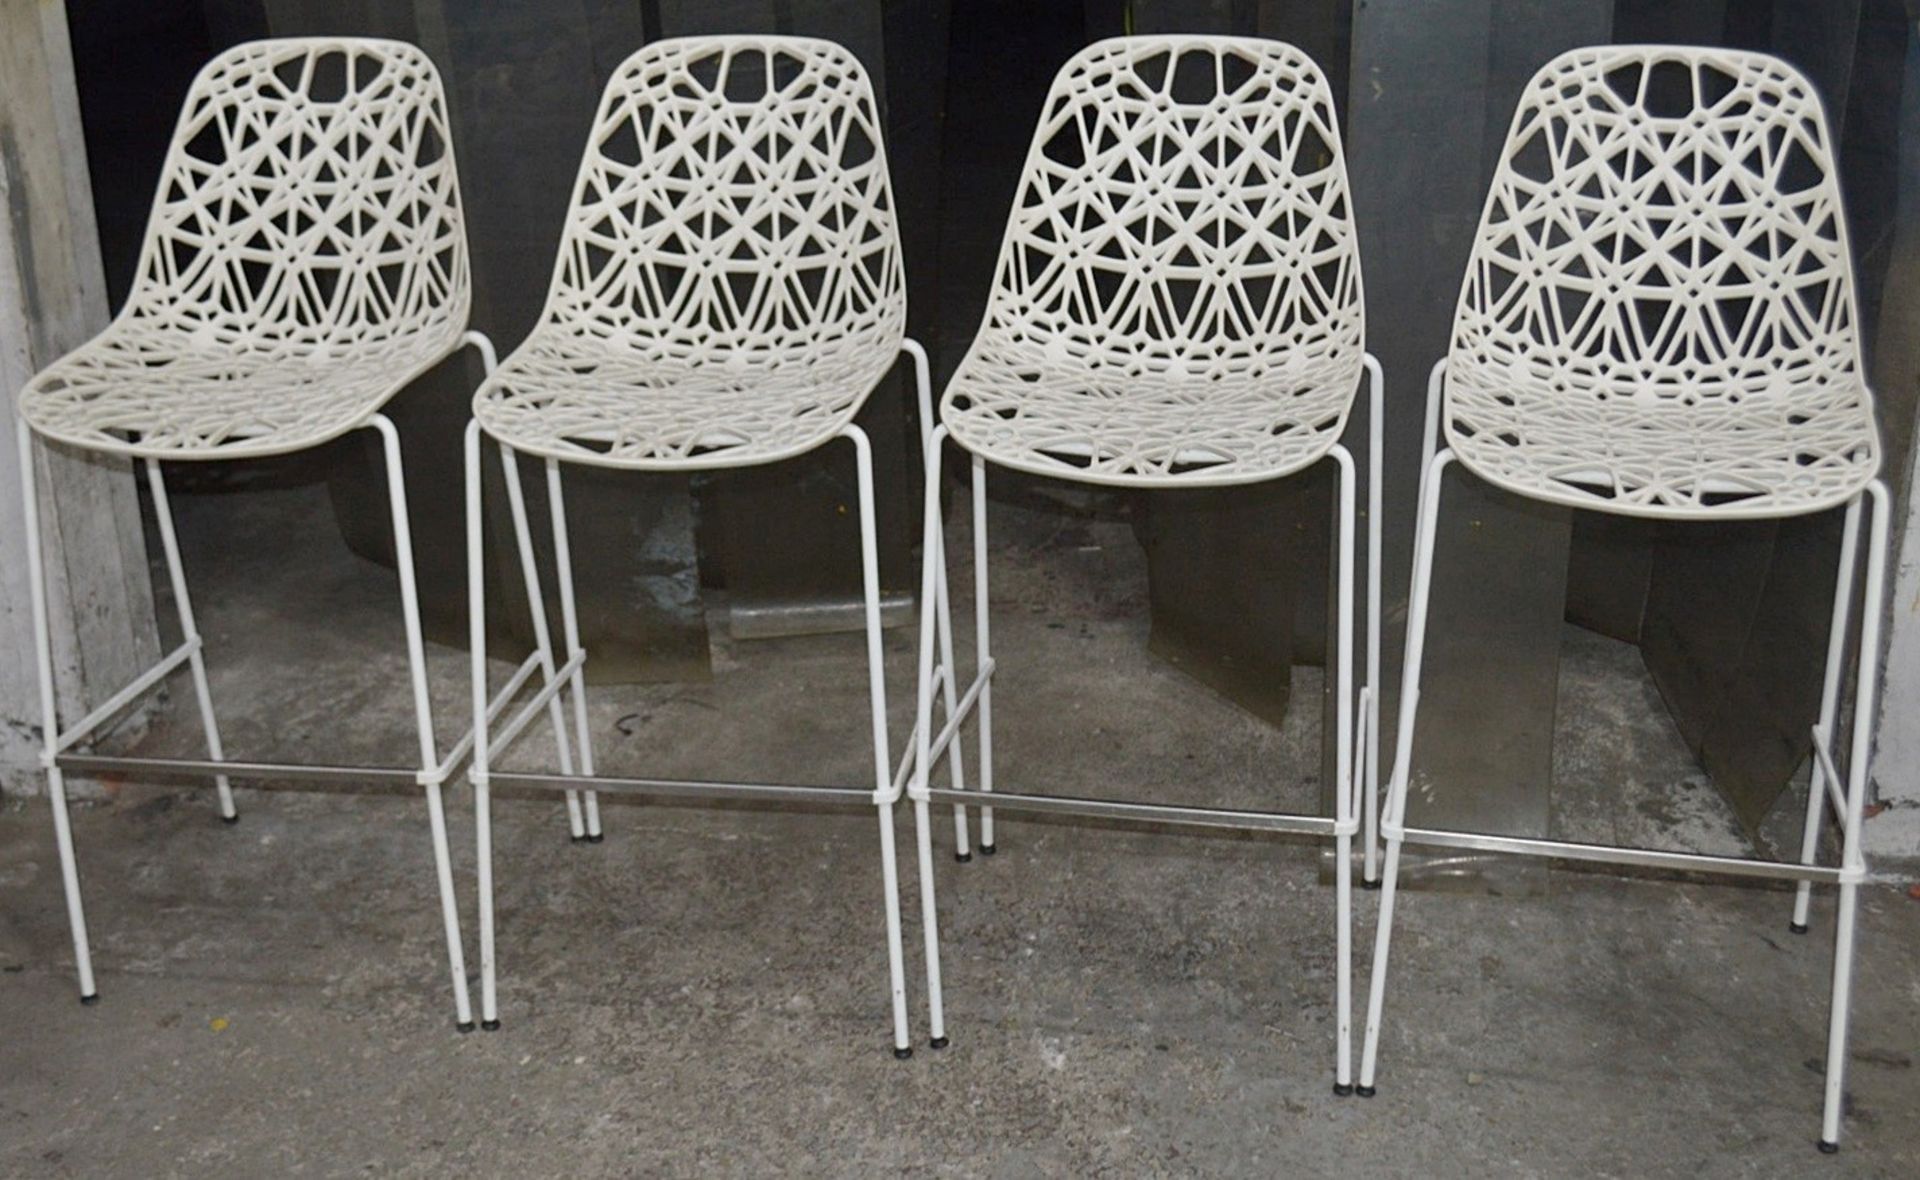 4 x Commercial Outdoor Bar Stools In White - Dimensions: H108 x W52 x D50cm, Seat Height 73cm